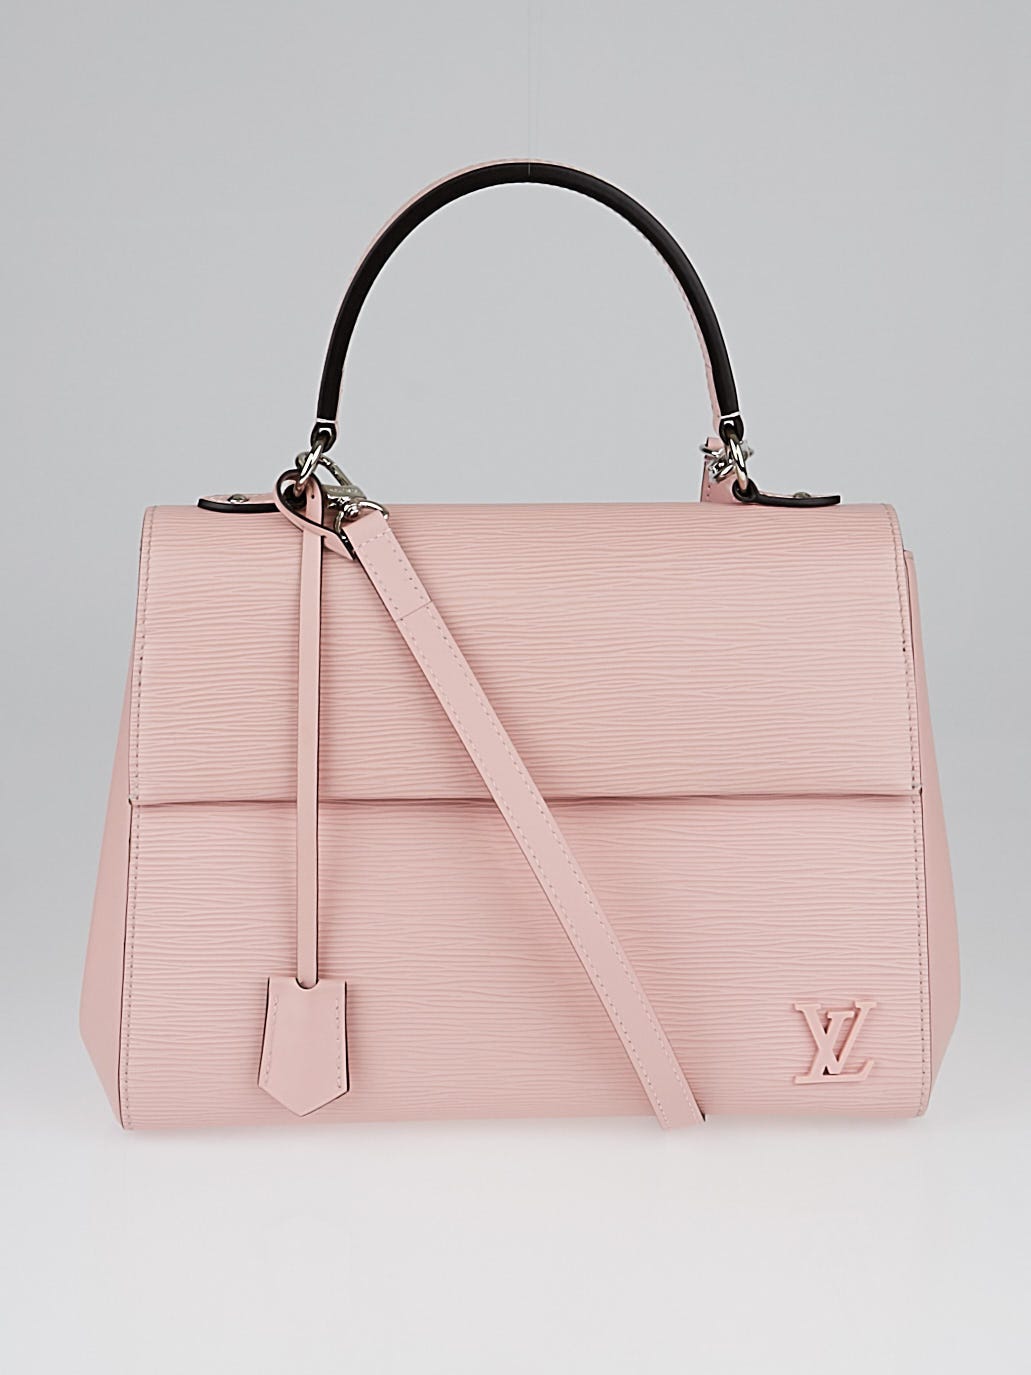 Louis Vuitton Cluny Top Handle Bag EPI Leather Bb Pink